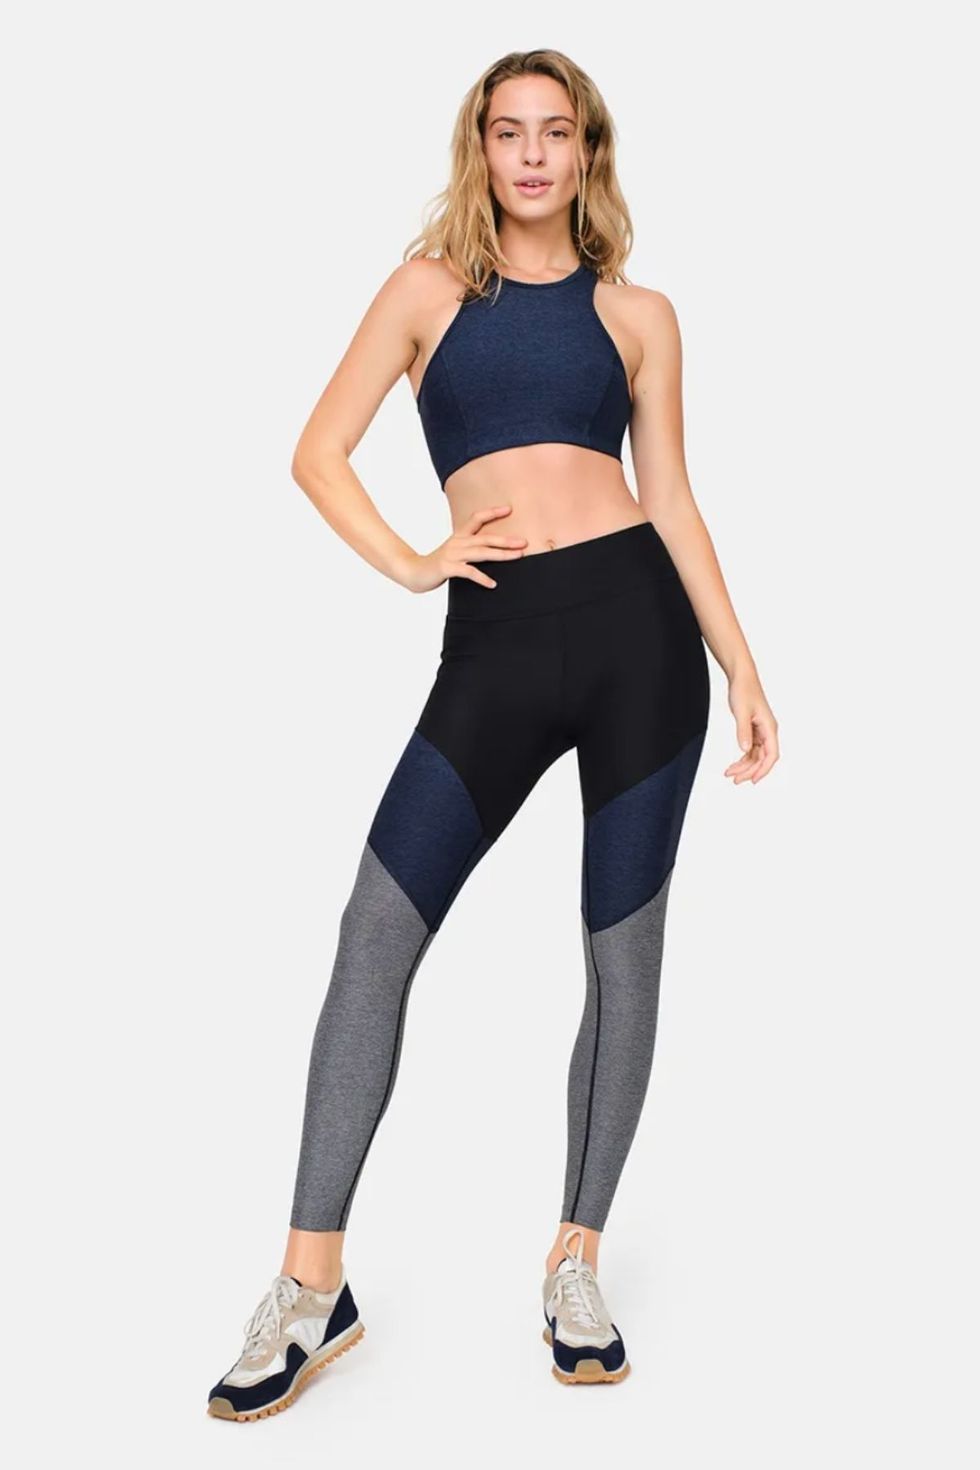 15 Best Compression Leggings & Tights for Women in 2022